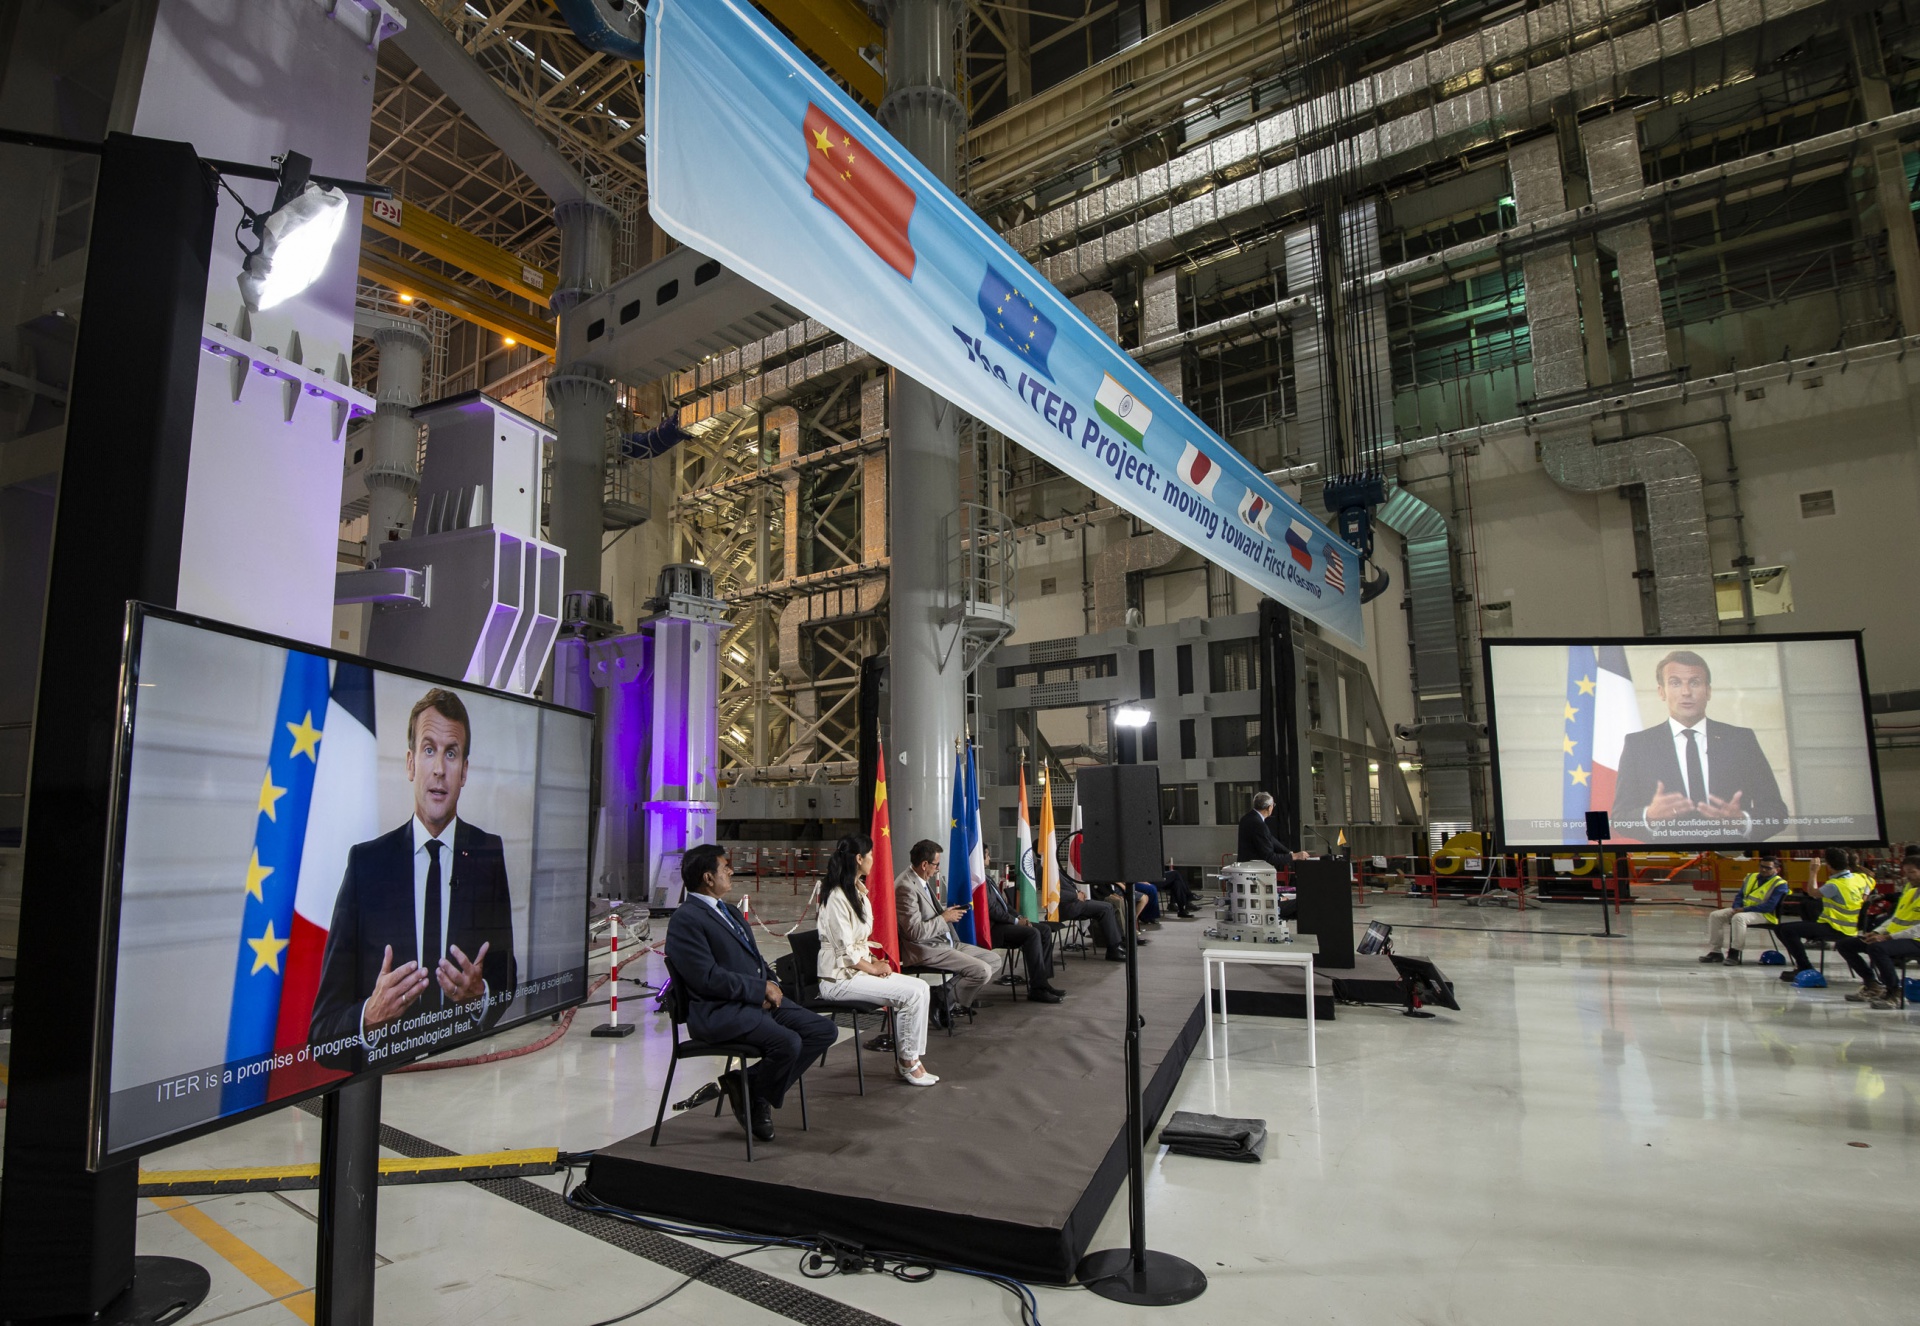 Ceremony marks start of machine assembly of ITER reactor in France